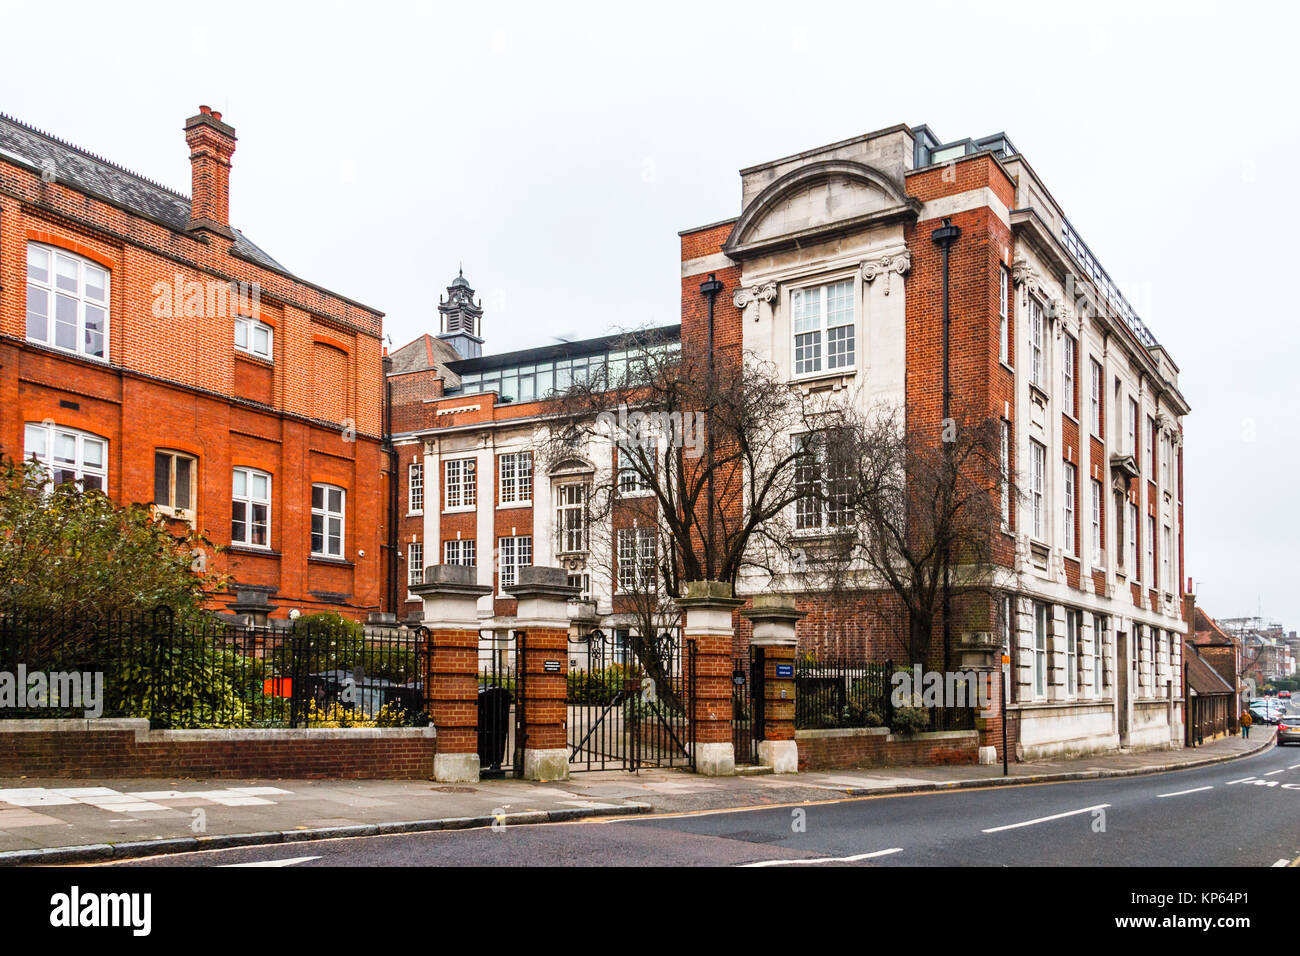 Highgate School, a co-educational independent day school, founded in 1565. Southwood Lane, Highgate, London, UK Stock Photo